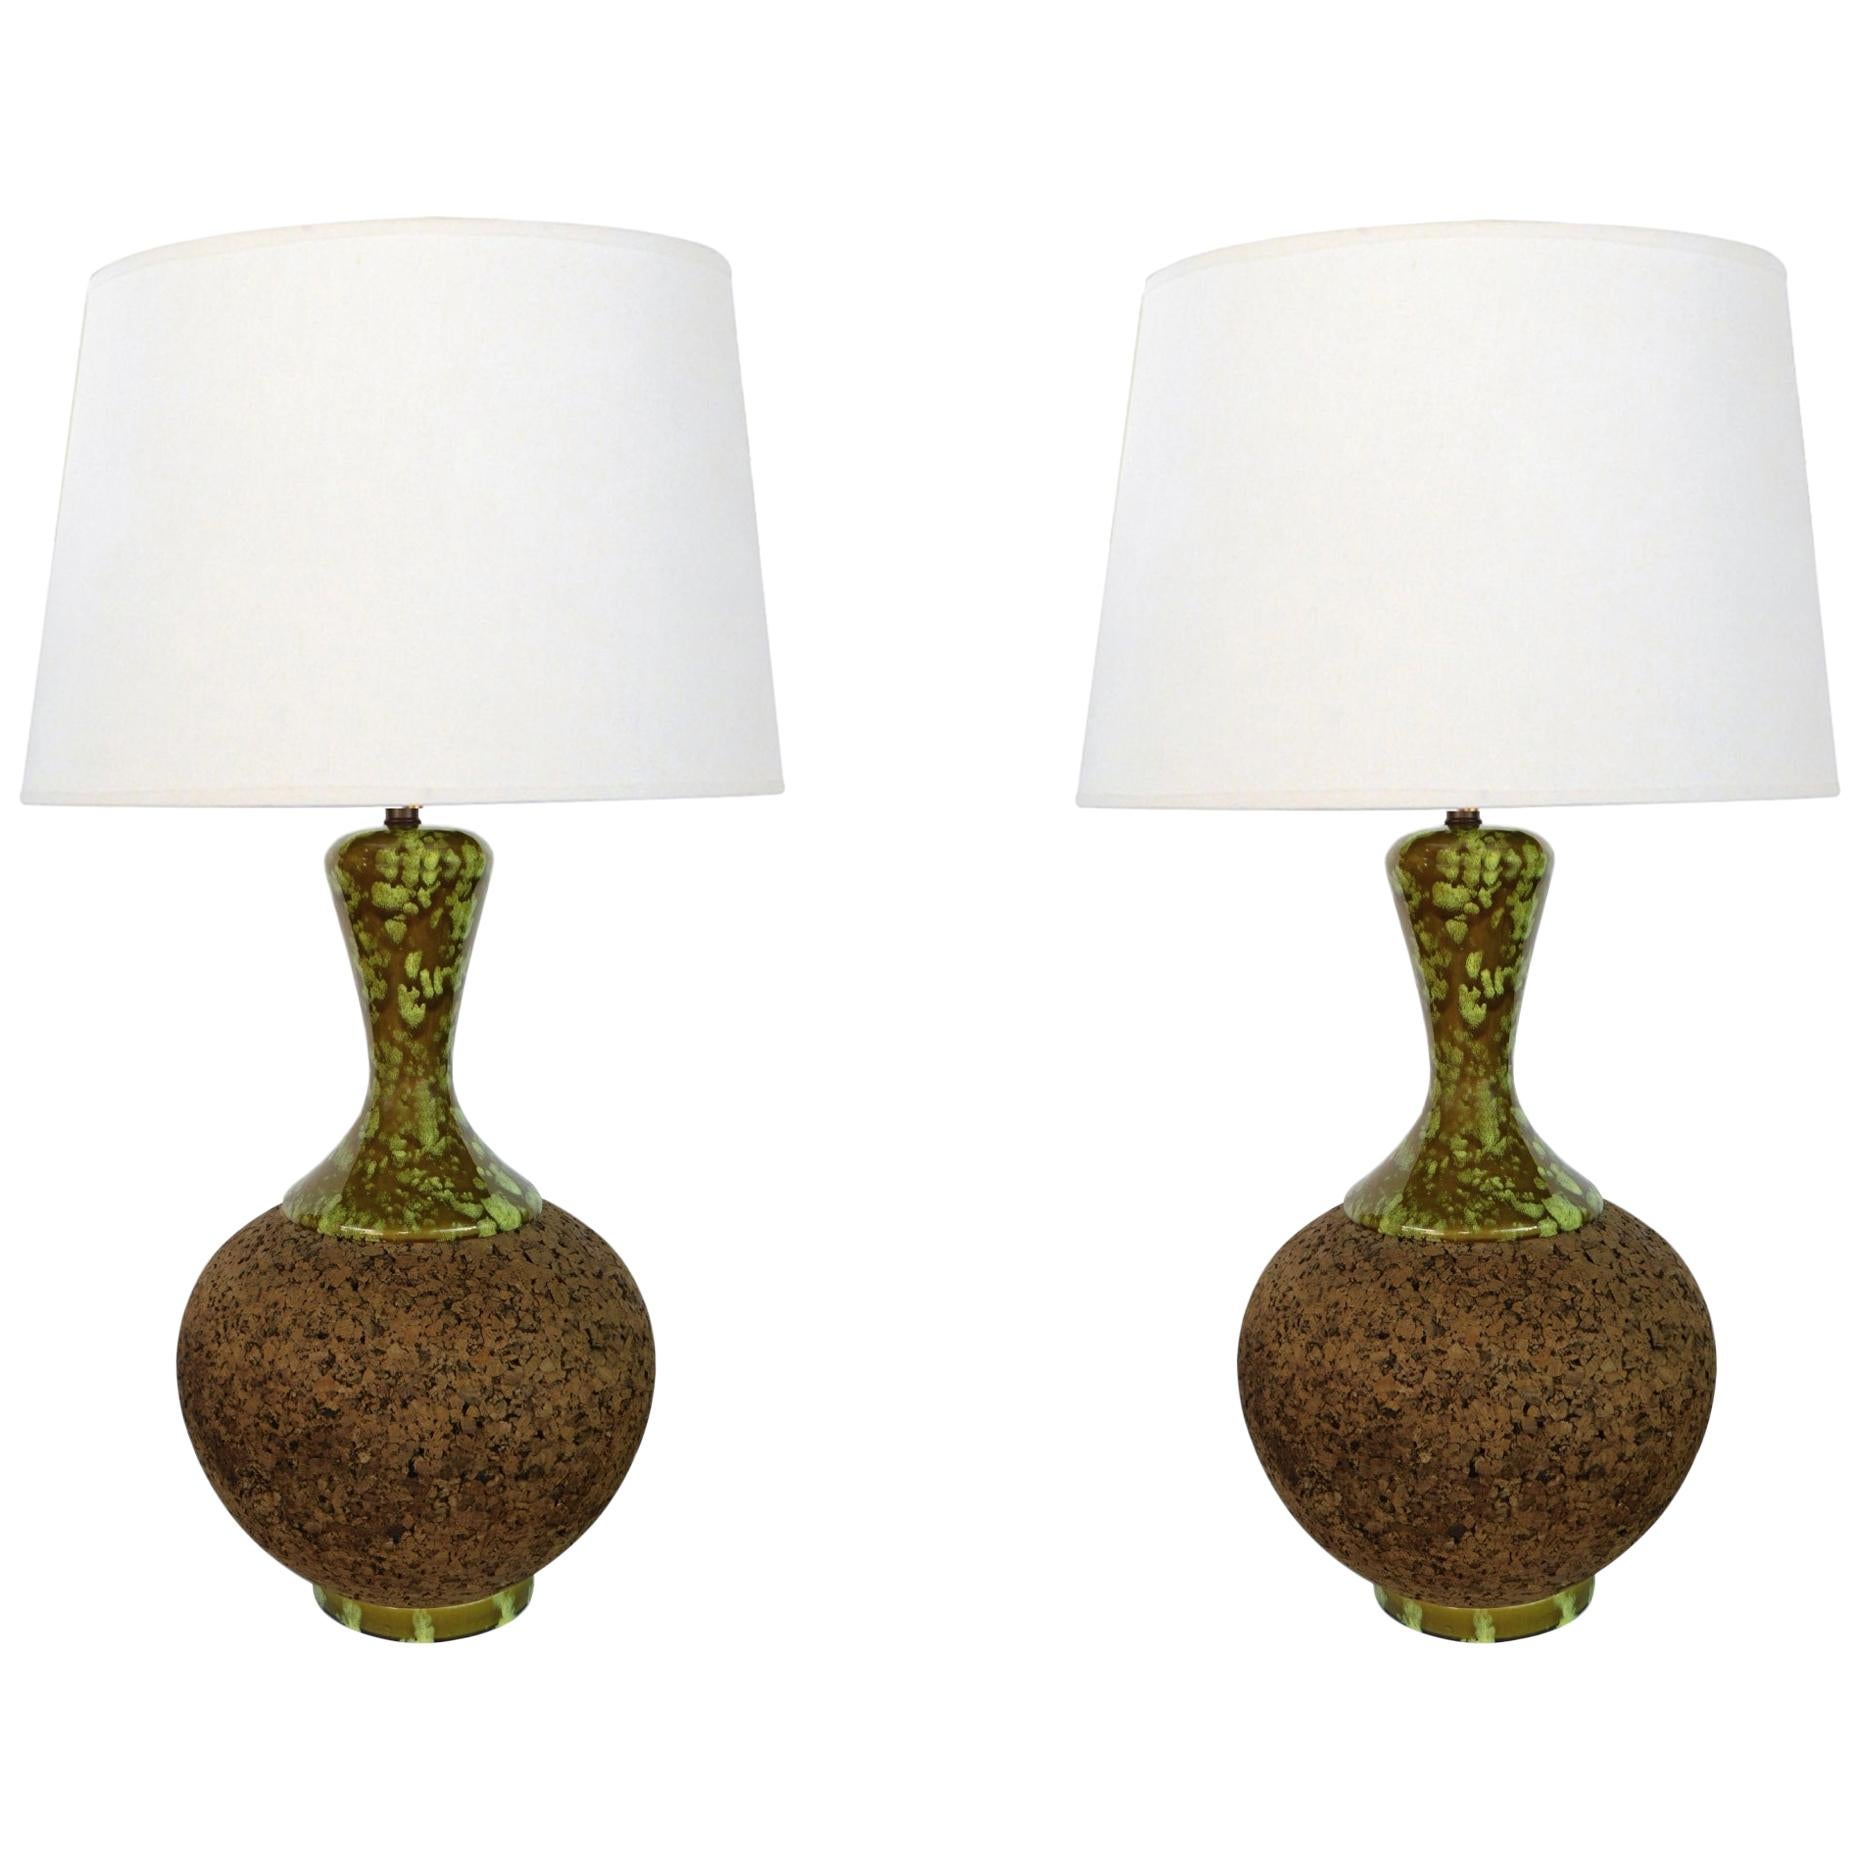 Large Pair of American 1960s Cork Lamps with Mottled Olive-Green Ceramic Mounts